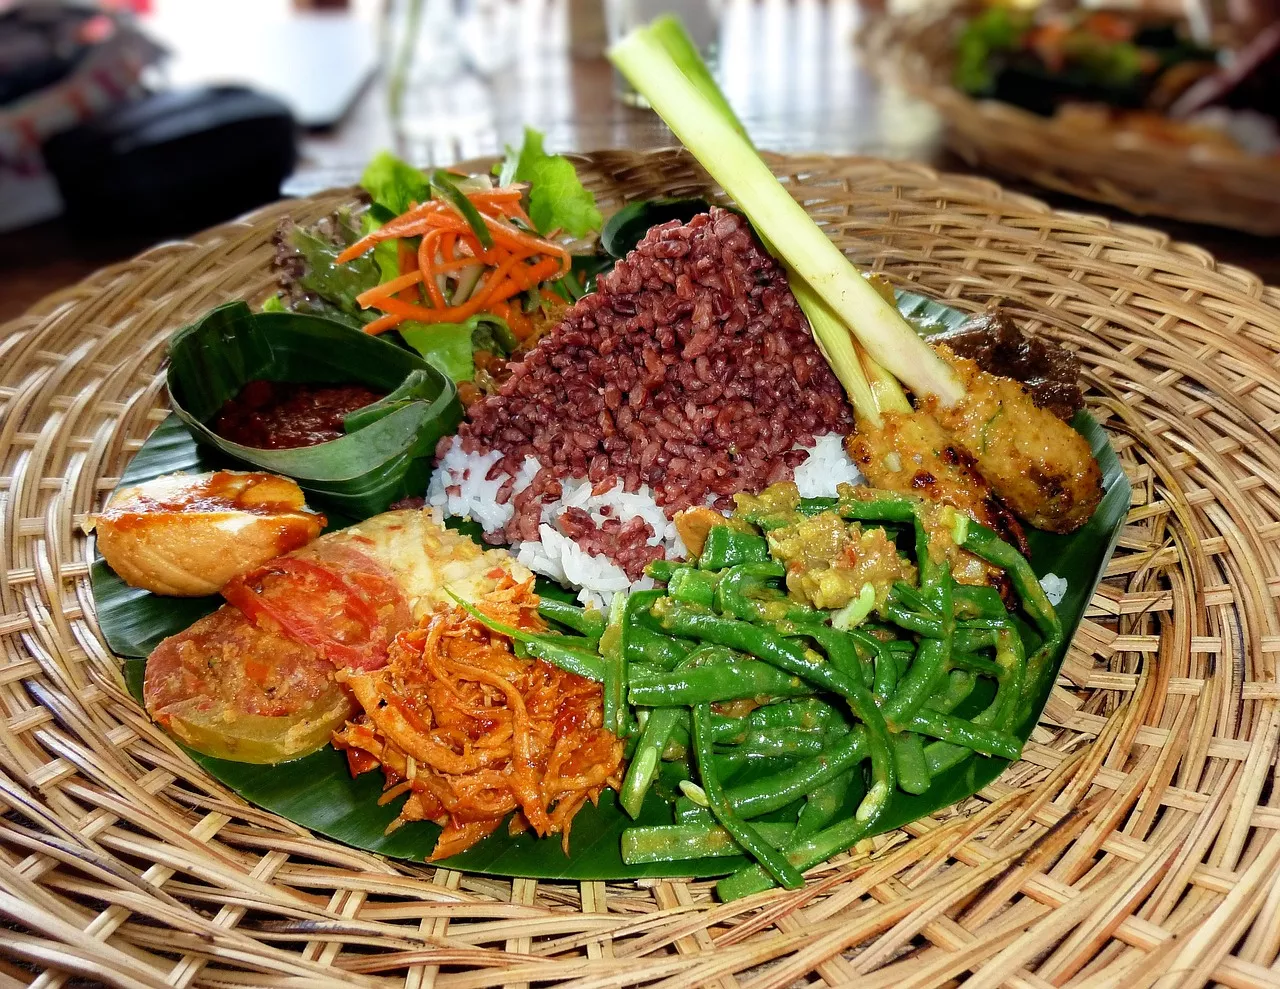 Indonesian Cuisine Through Spice, Culture, and Tradition